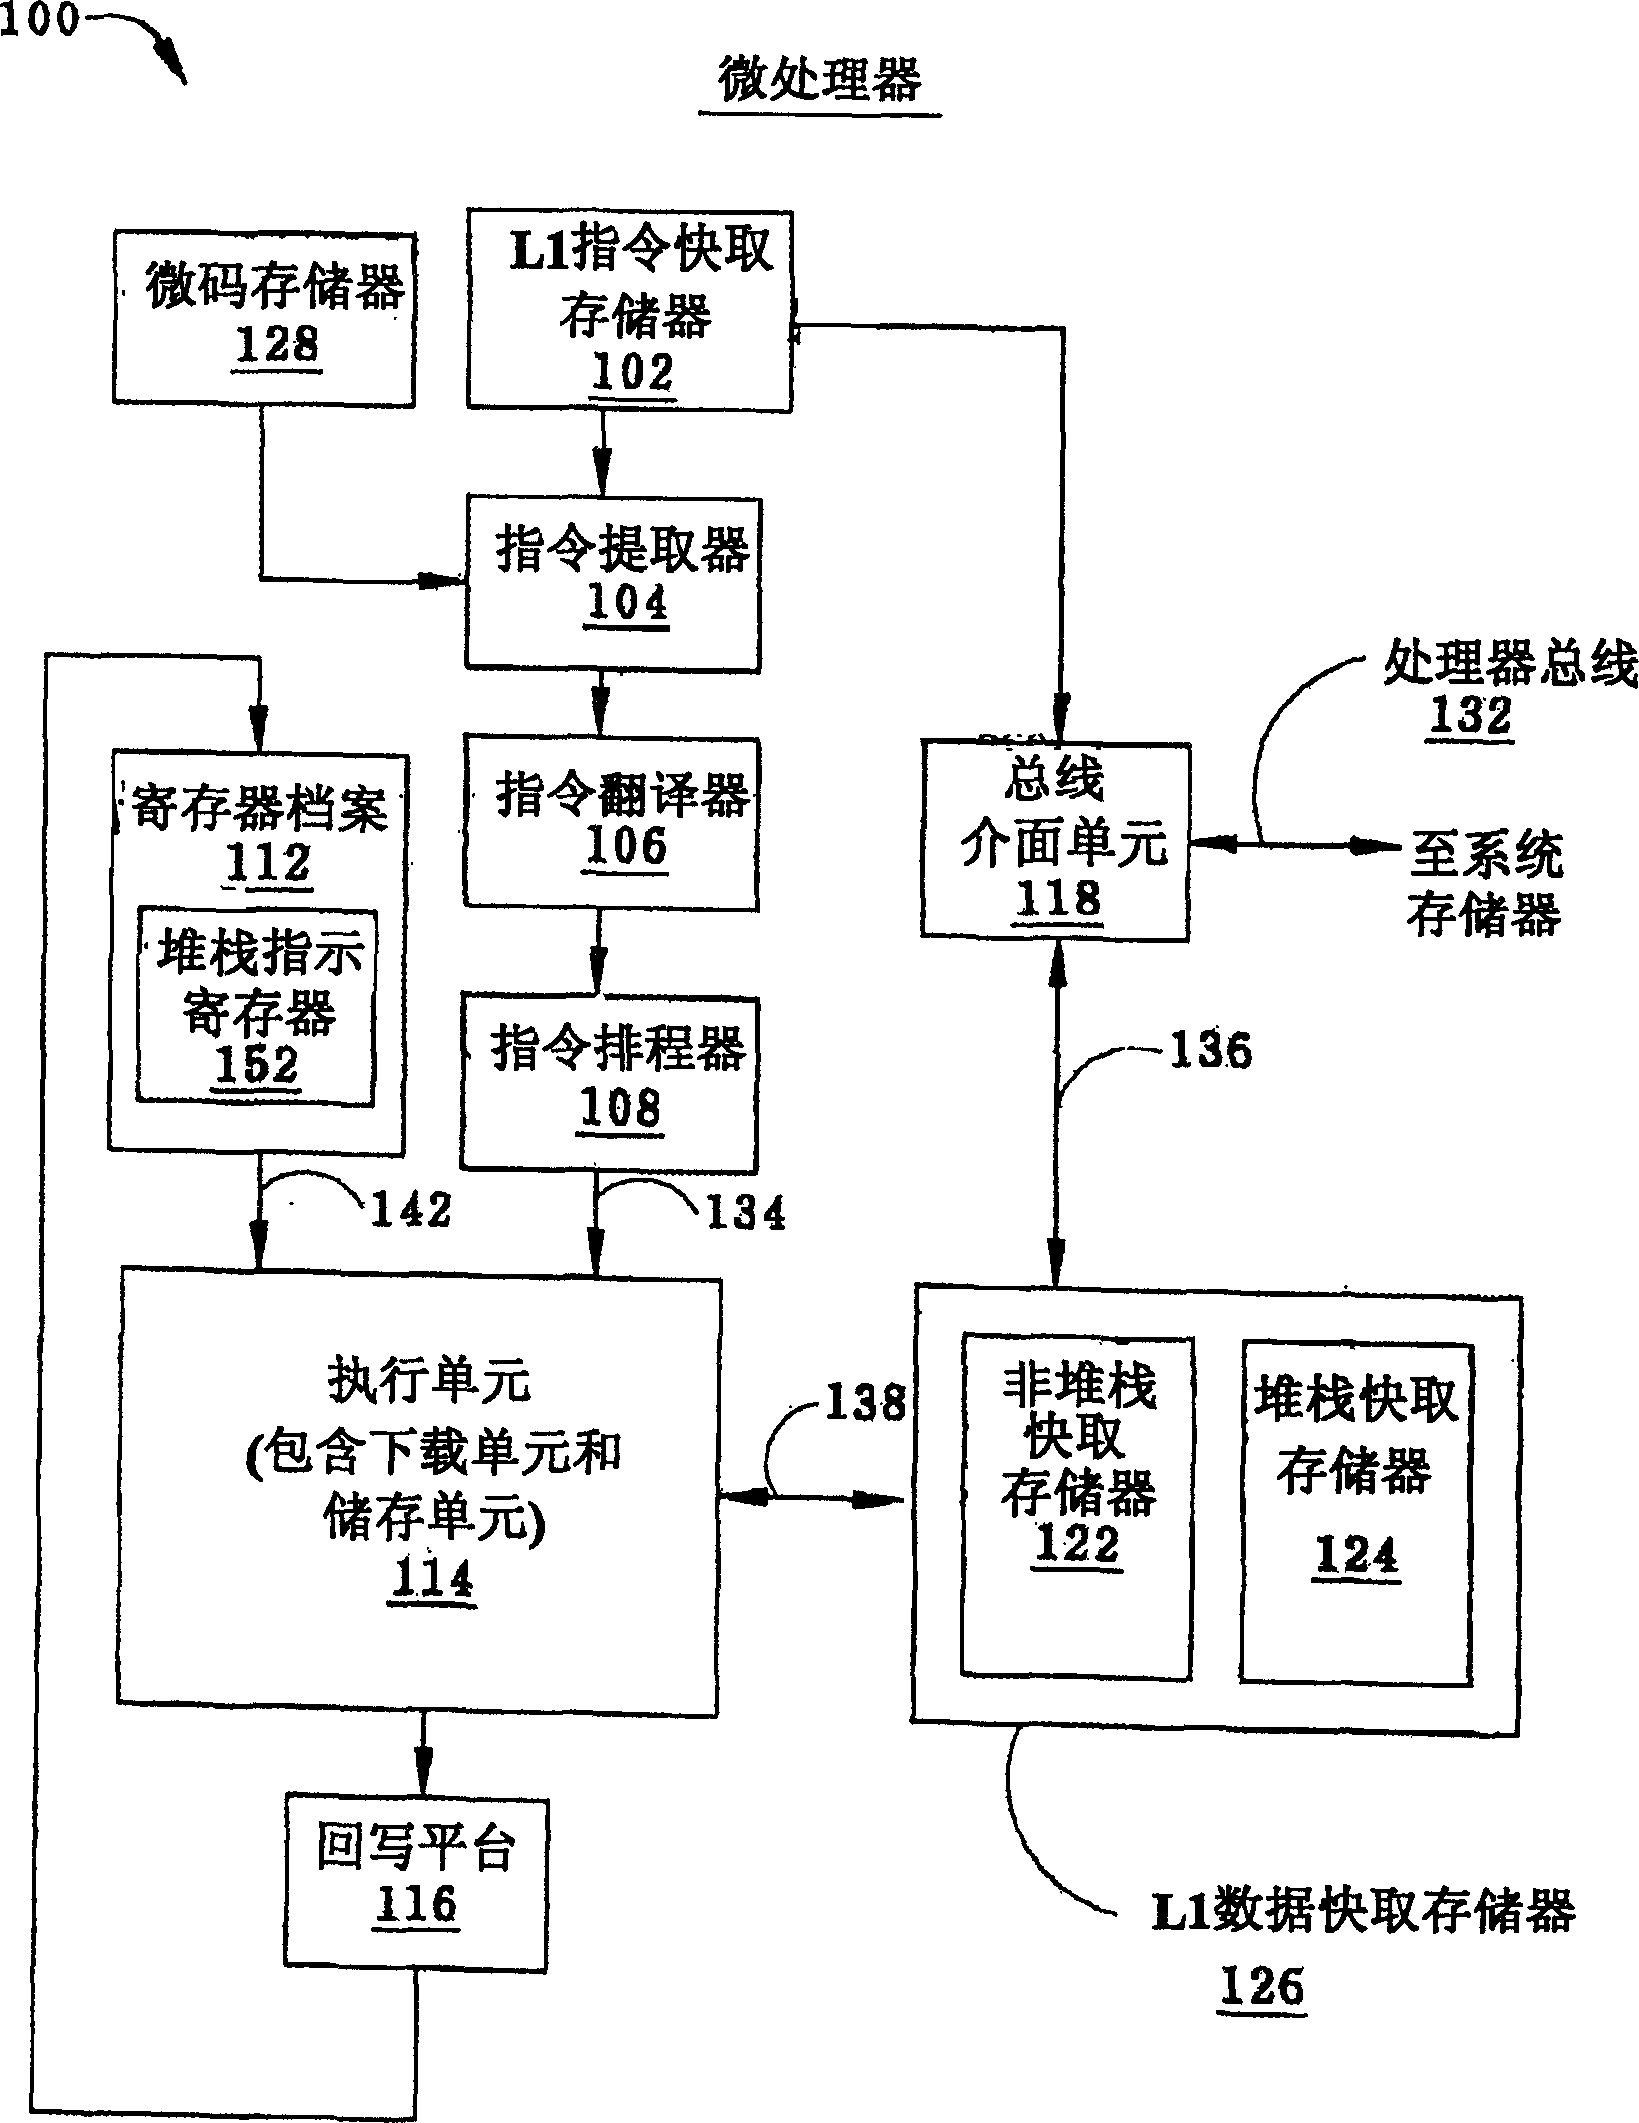 Variable latency stack cache and method for providing data